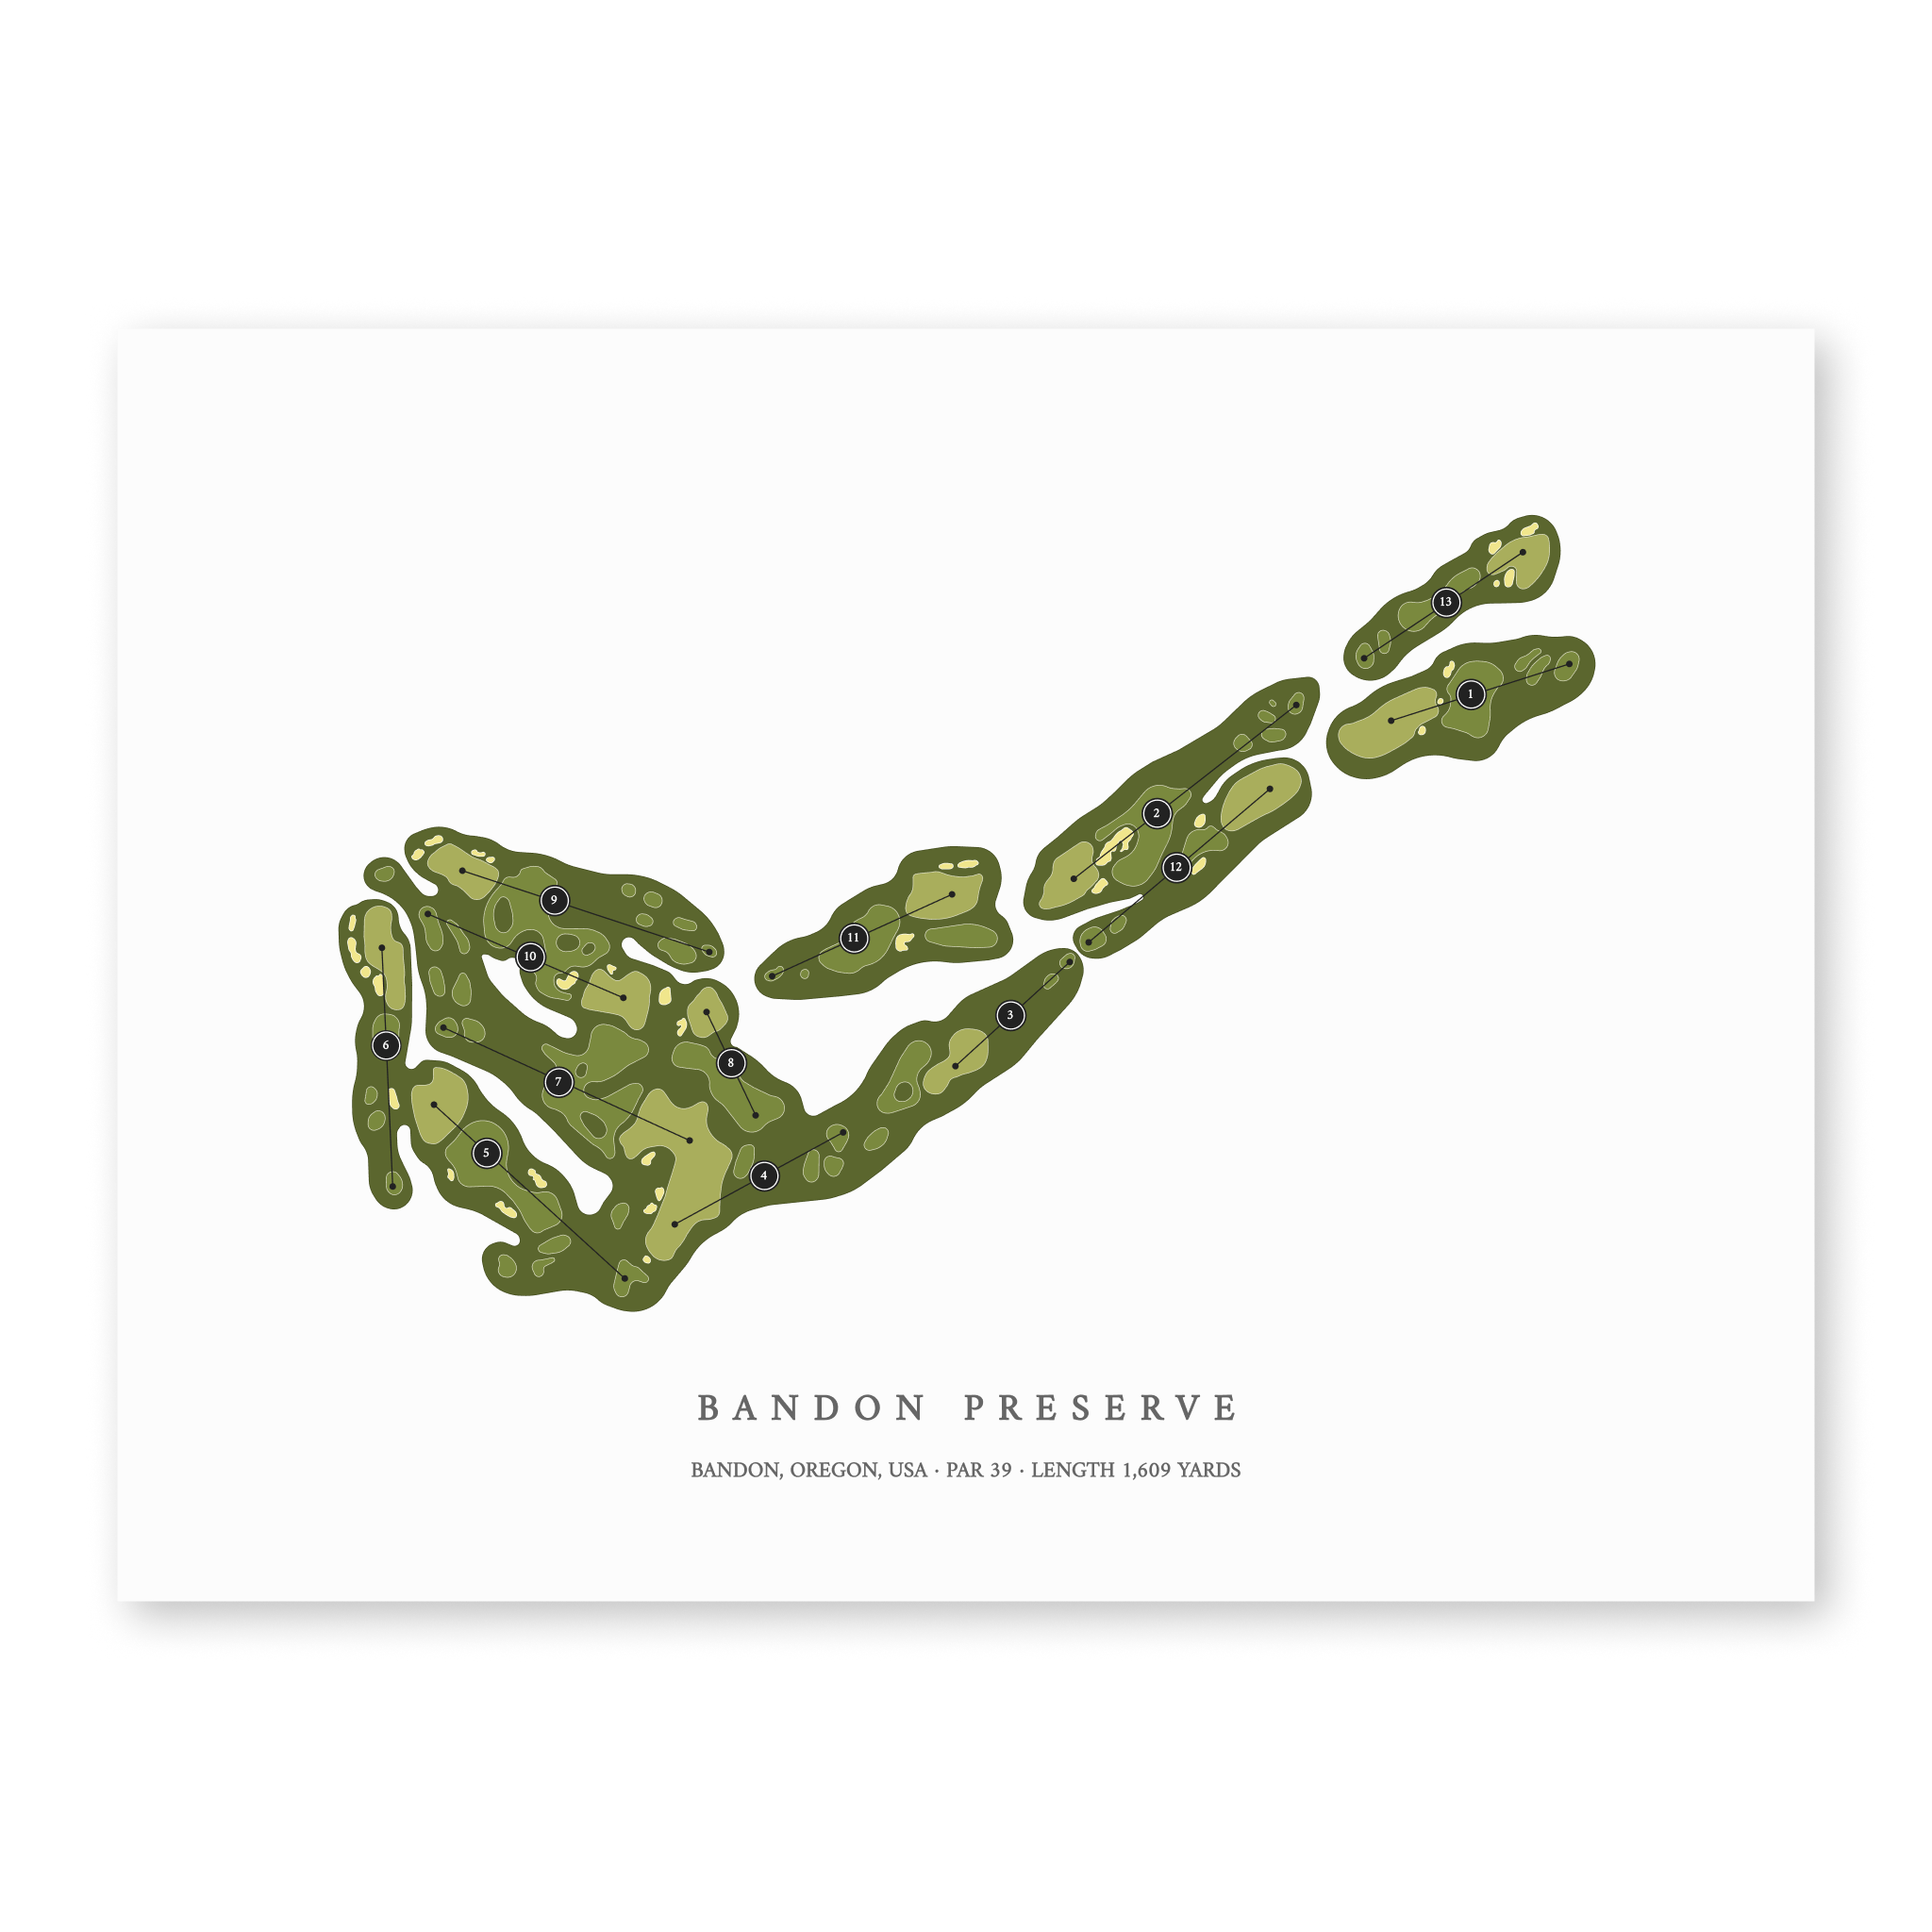 Bandon Preserve| Golf Course Print | Unframed With Hole Numbers #hole numbers_yes